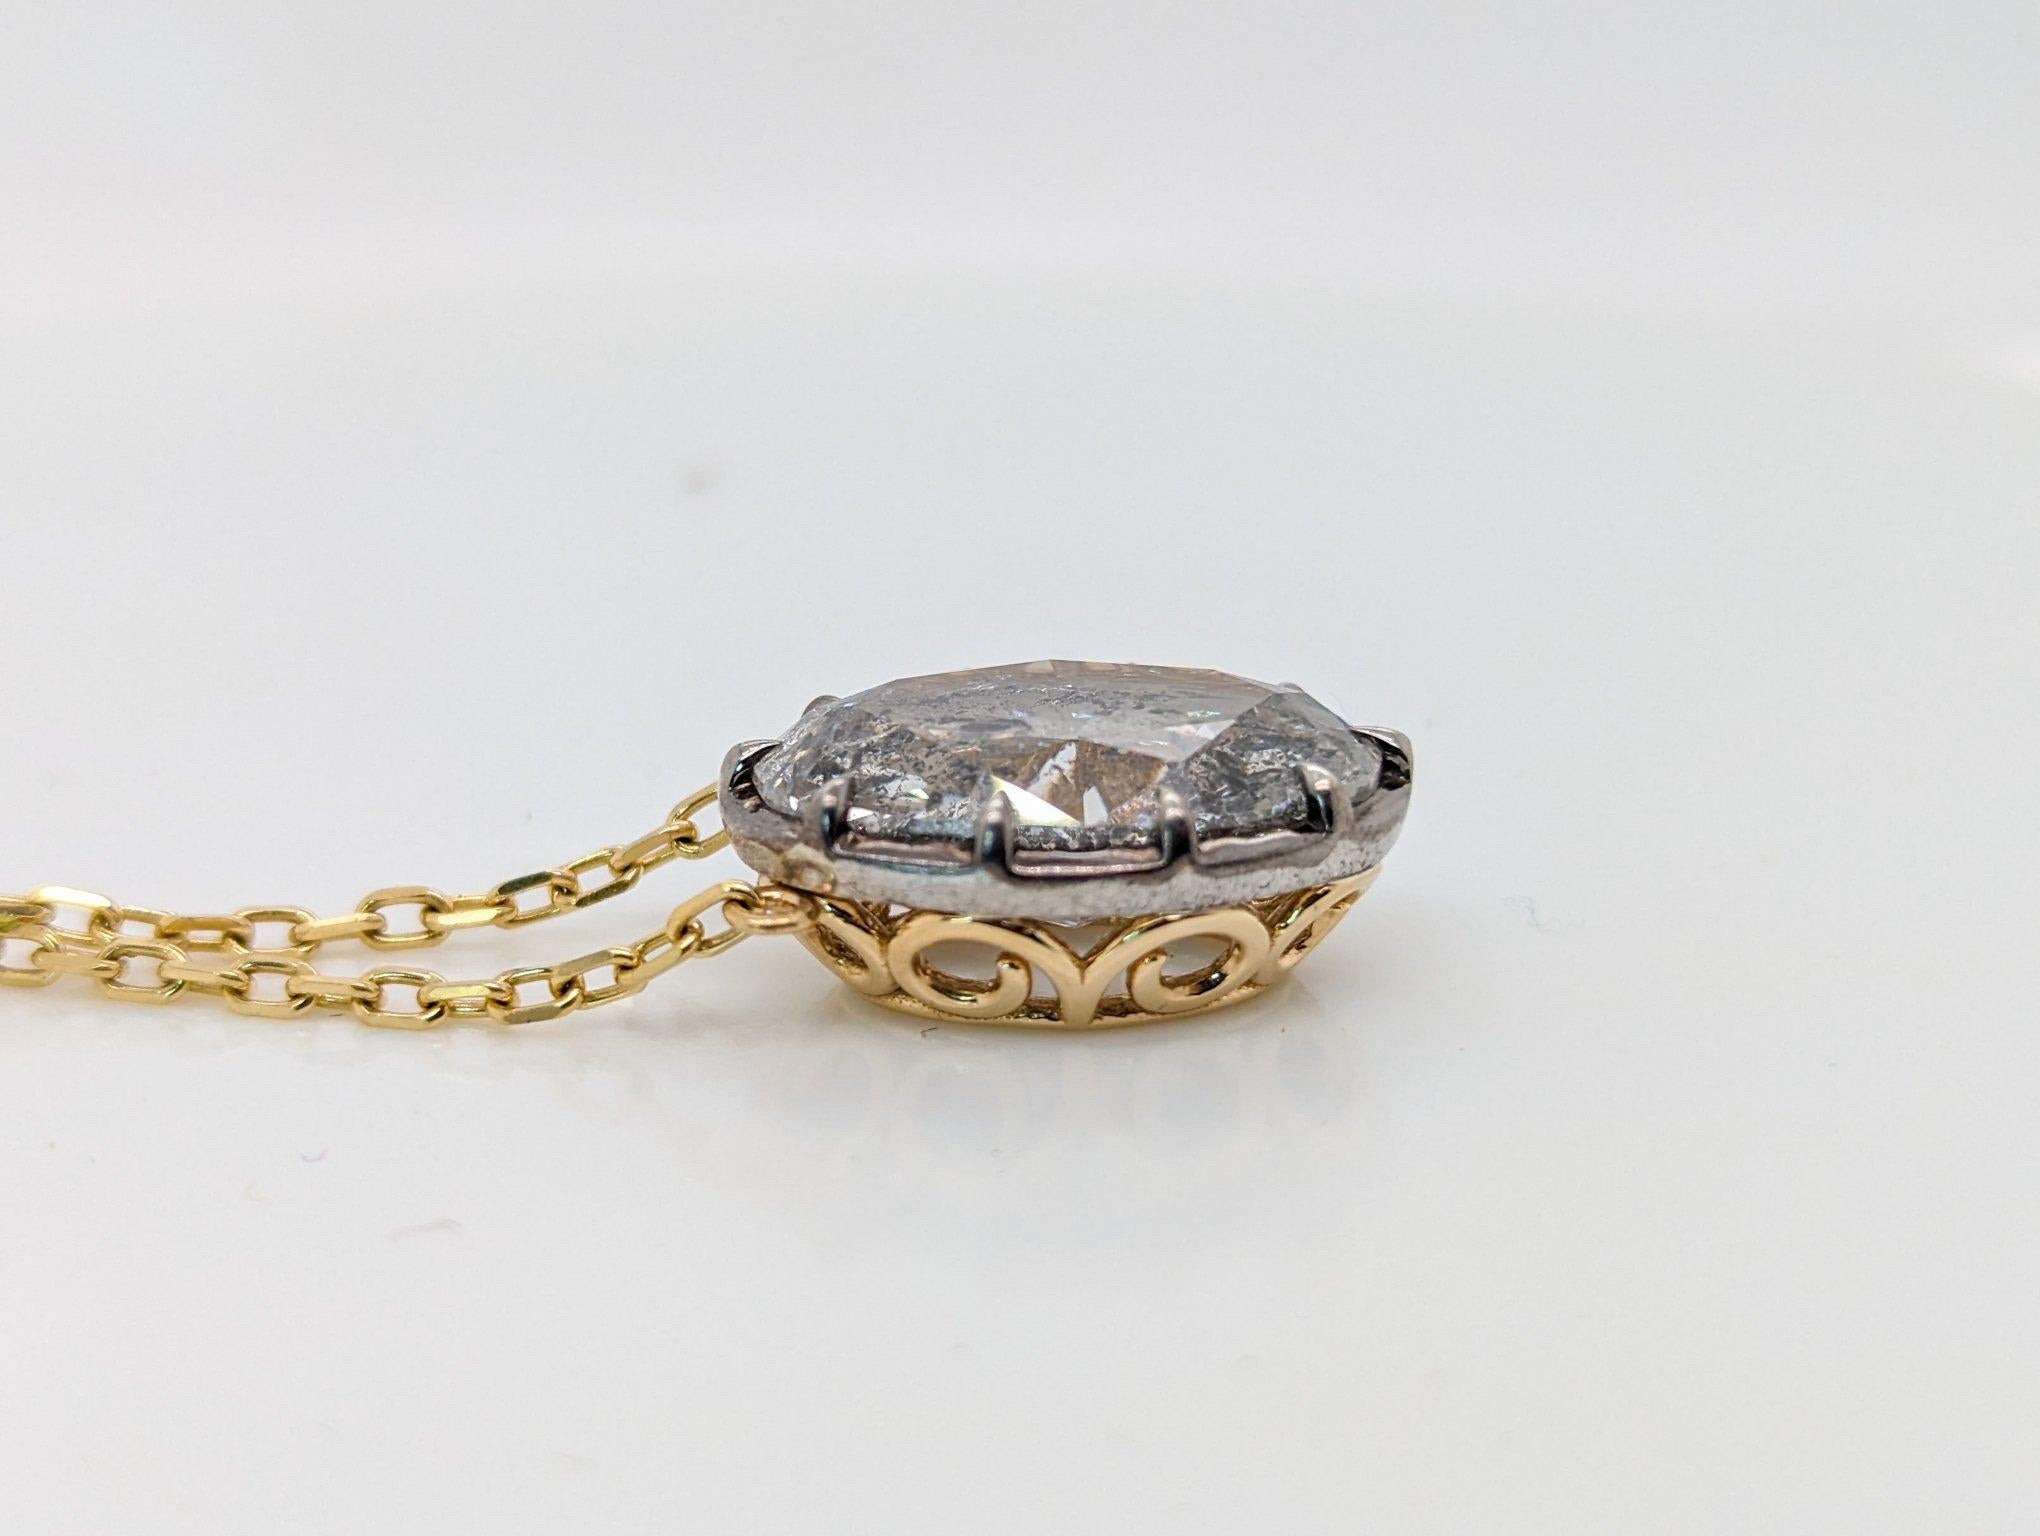 This pendant is our very own Georgian-inspired design featuring a sparkling 7.66 carat diamond set in 18K yellow gold and sterling silver. 